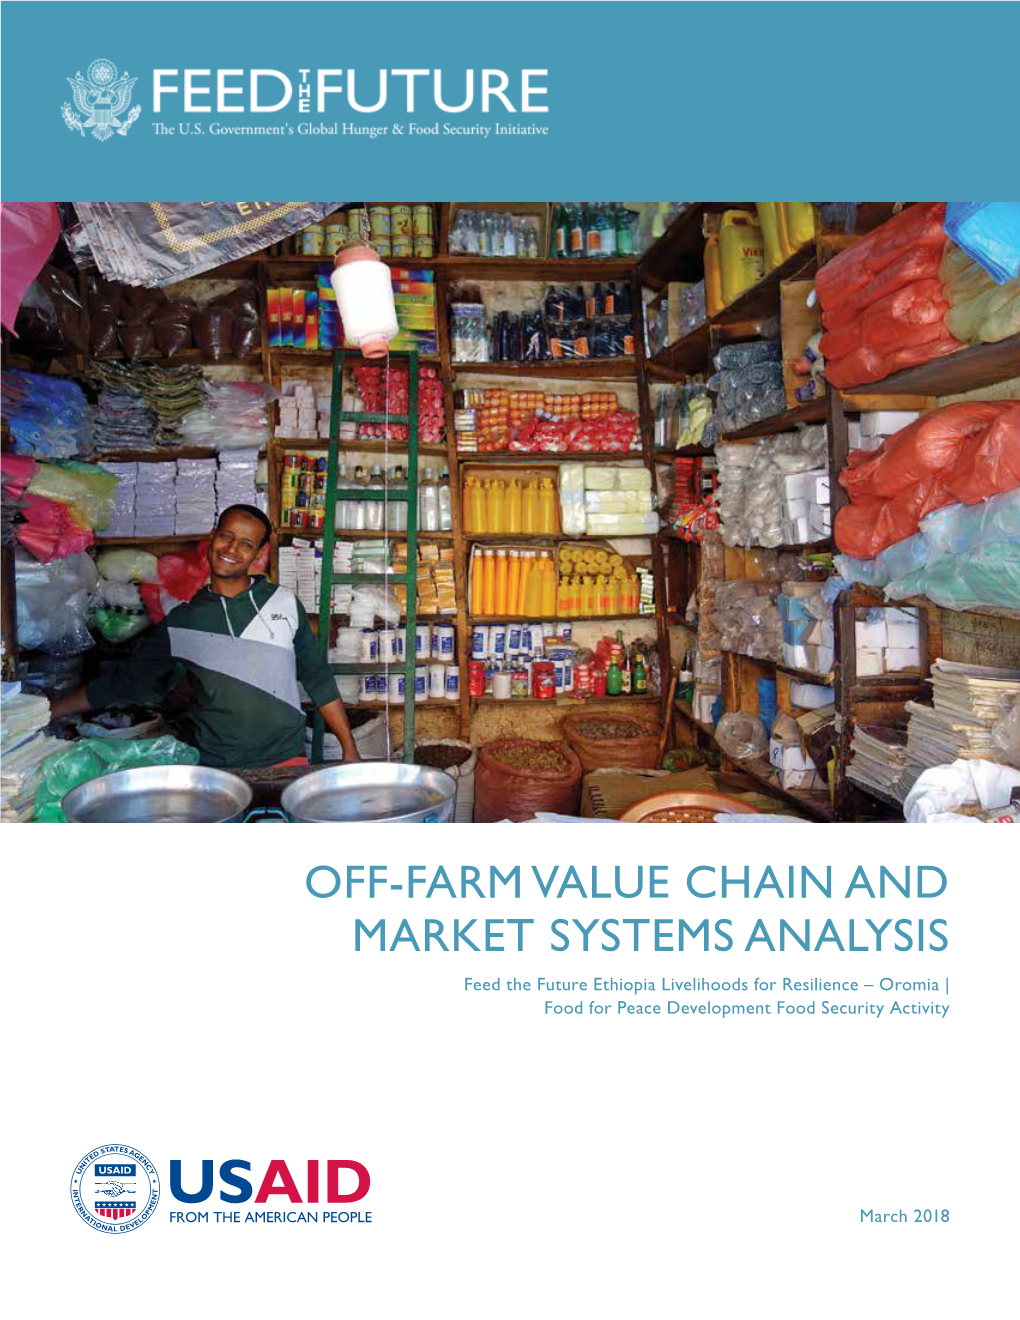 OFF‑FARM VALUE CHAIN and MARKET SYSTEMS ANALYSIS Feed the Future Ethiopia Livelihoods for Resilience – Oromia | Food for Peace Development Food Security Activity